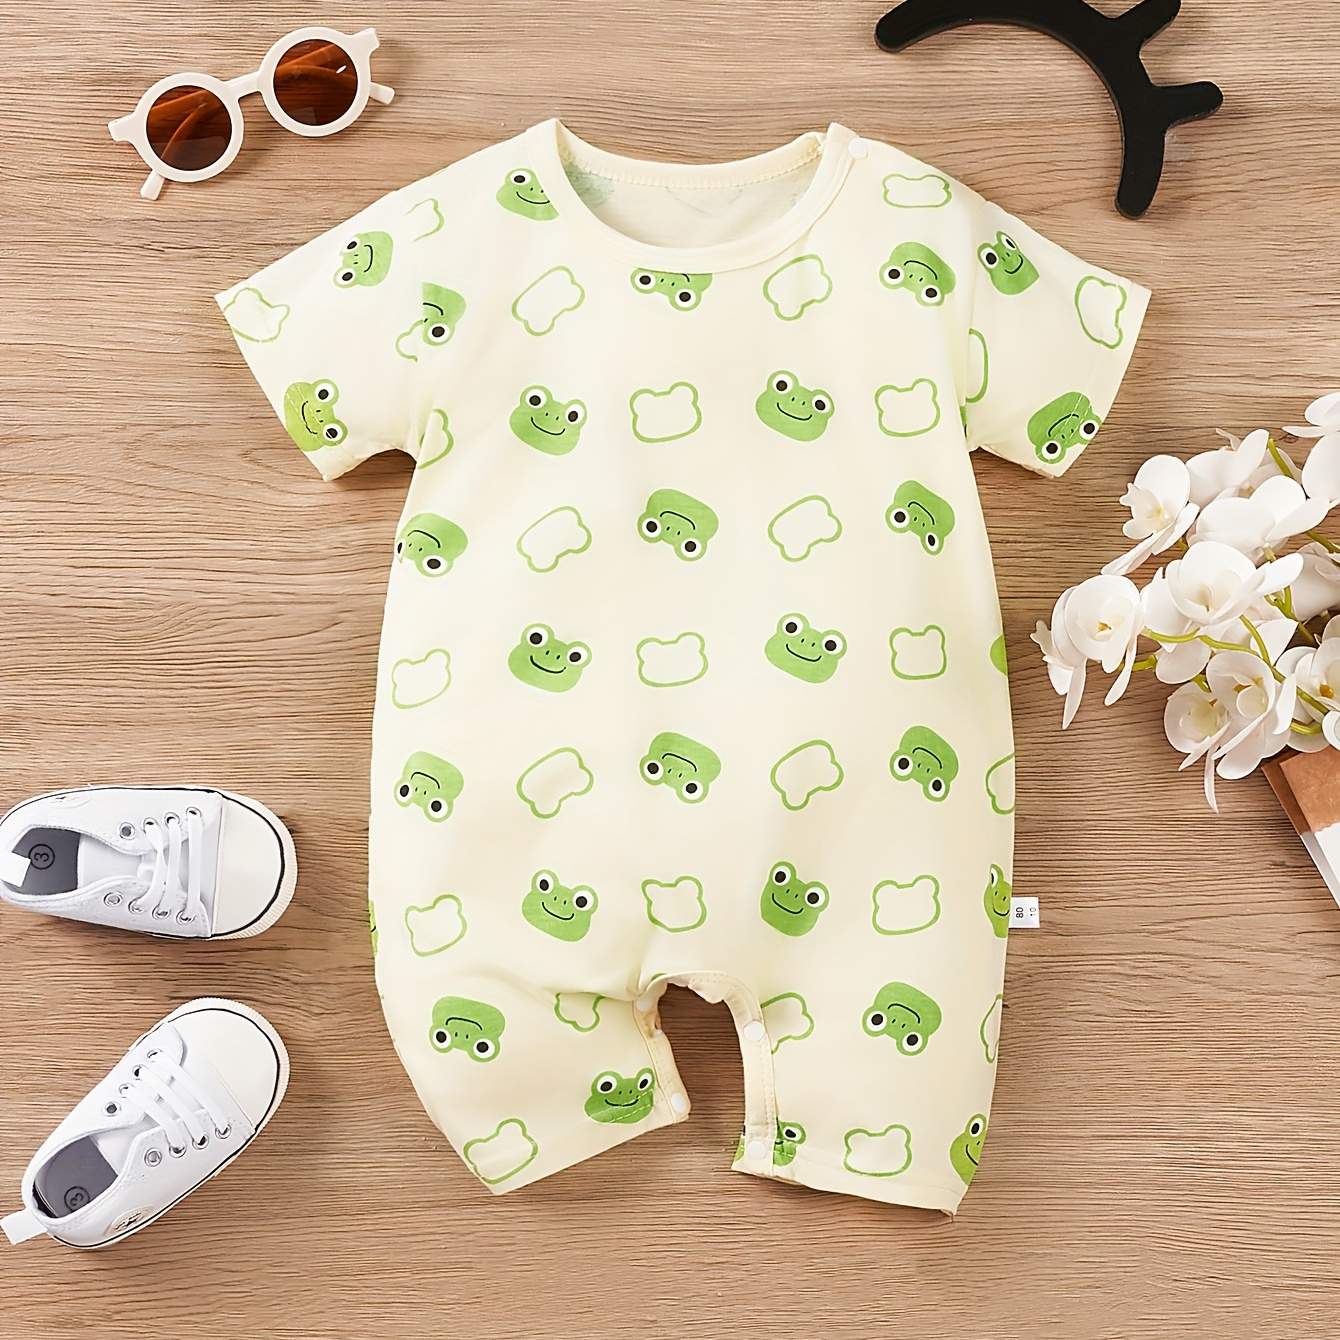 

Infant's Cartoon Frog All-over Print Cotton Bodysuit, Casual Short Sleeve Romper, Baby Boy's Clothing